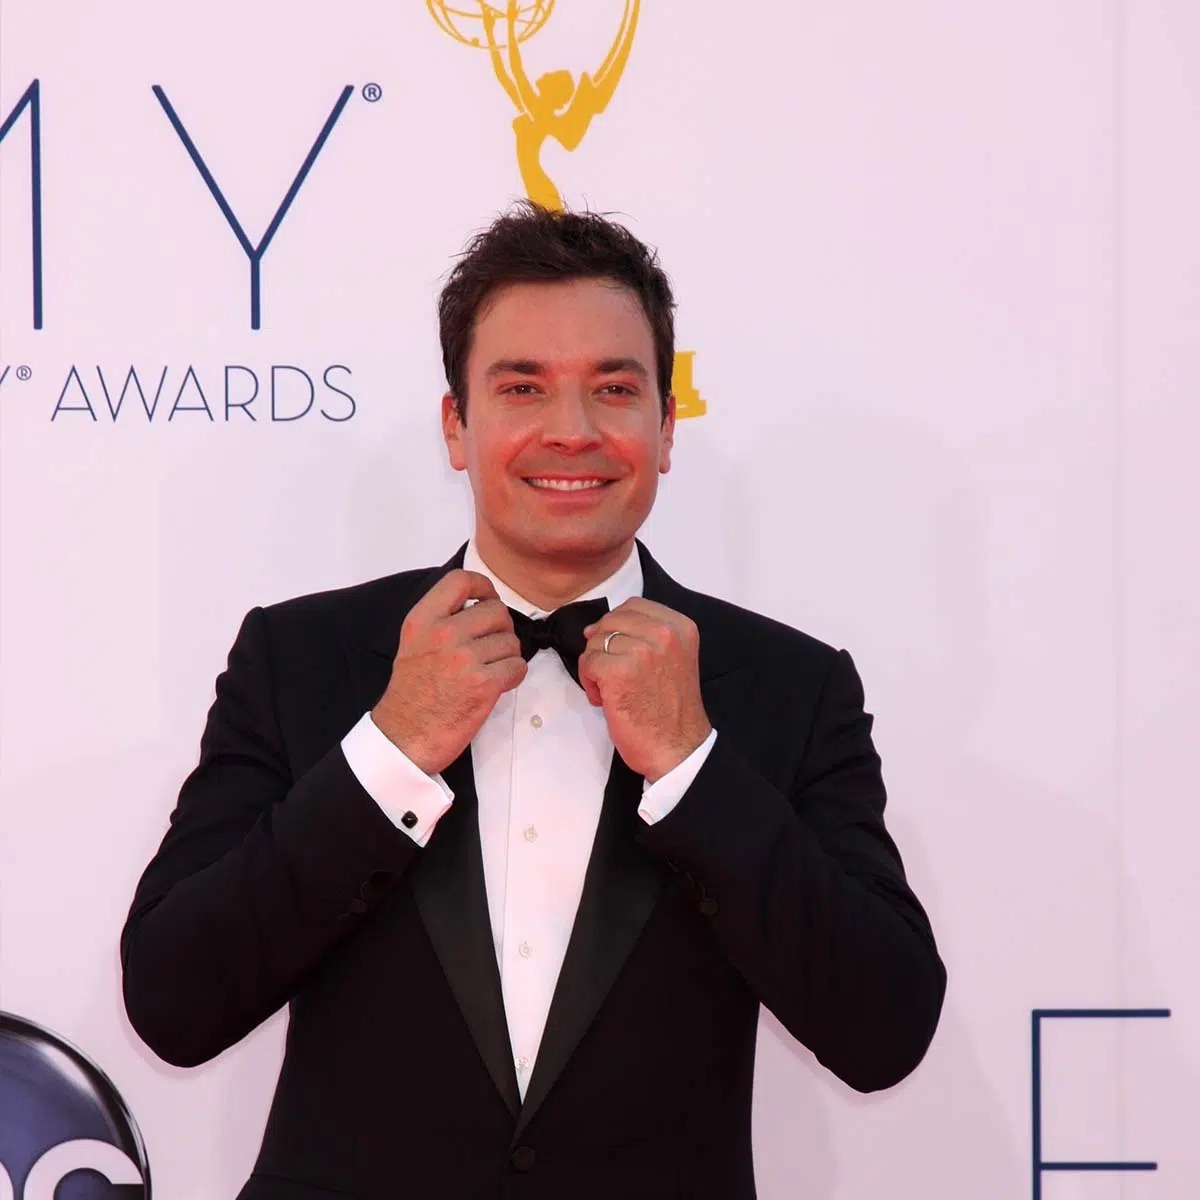 Jimmy Fallon Biography: Net Worth, Wife, Age, Children, Movies, TV Shows, Parents, YouTube, Instagram, Children